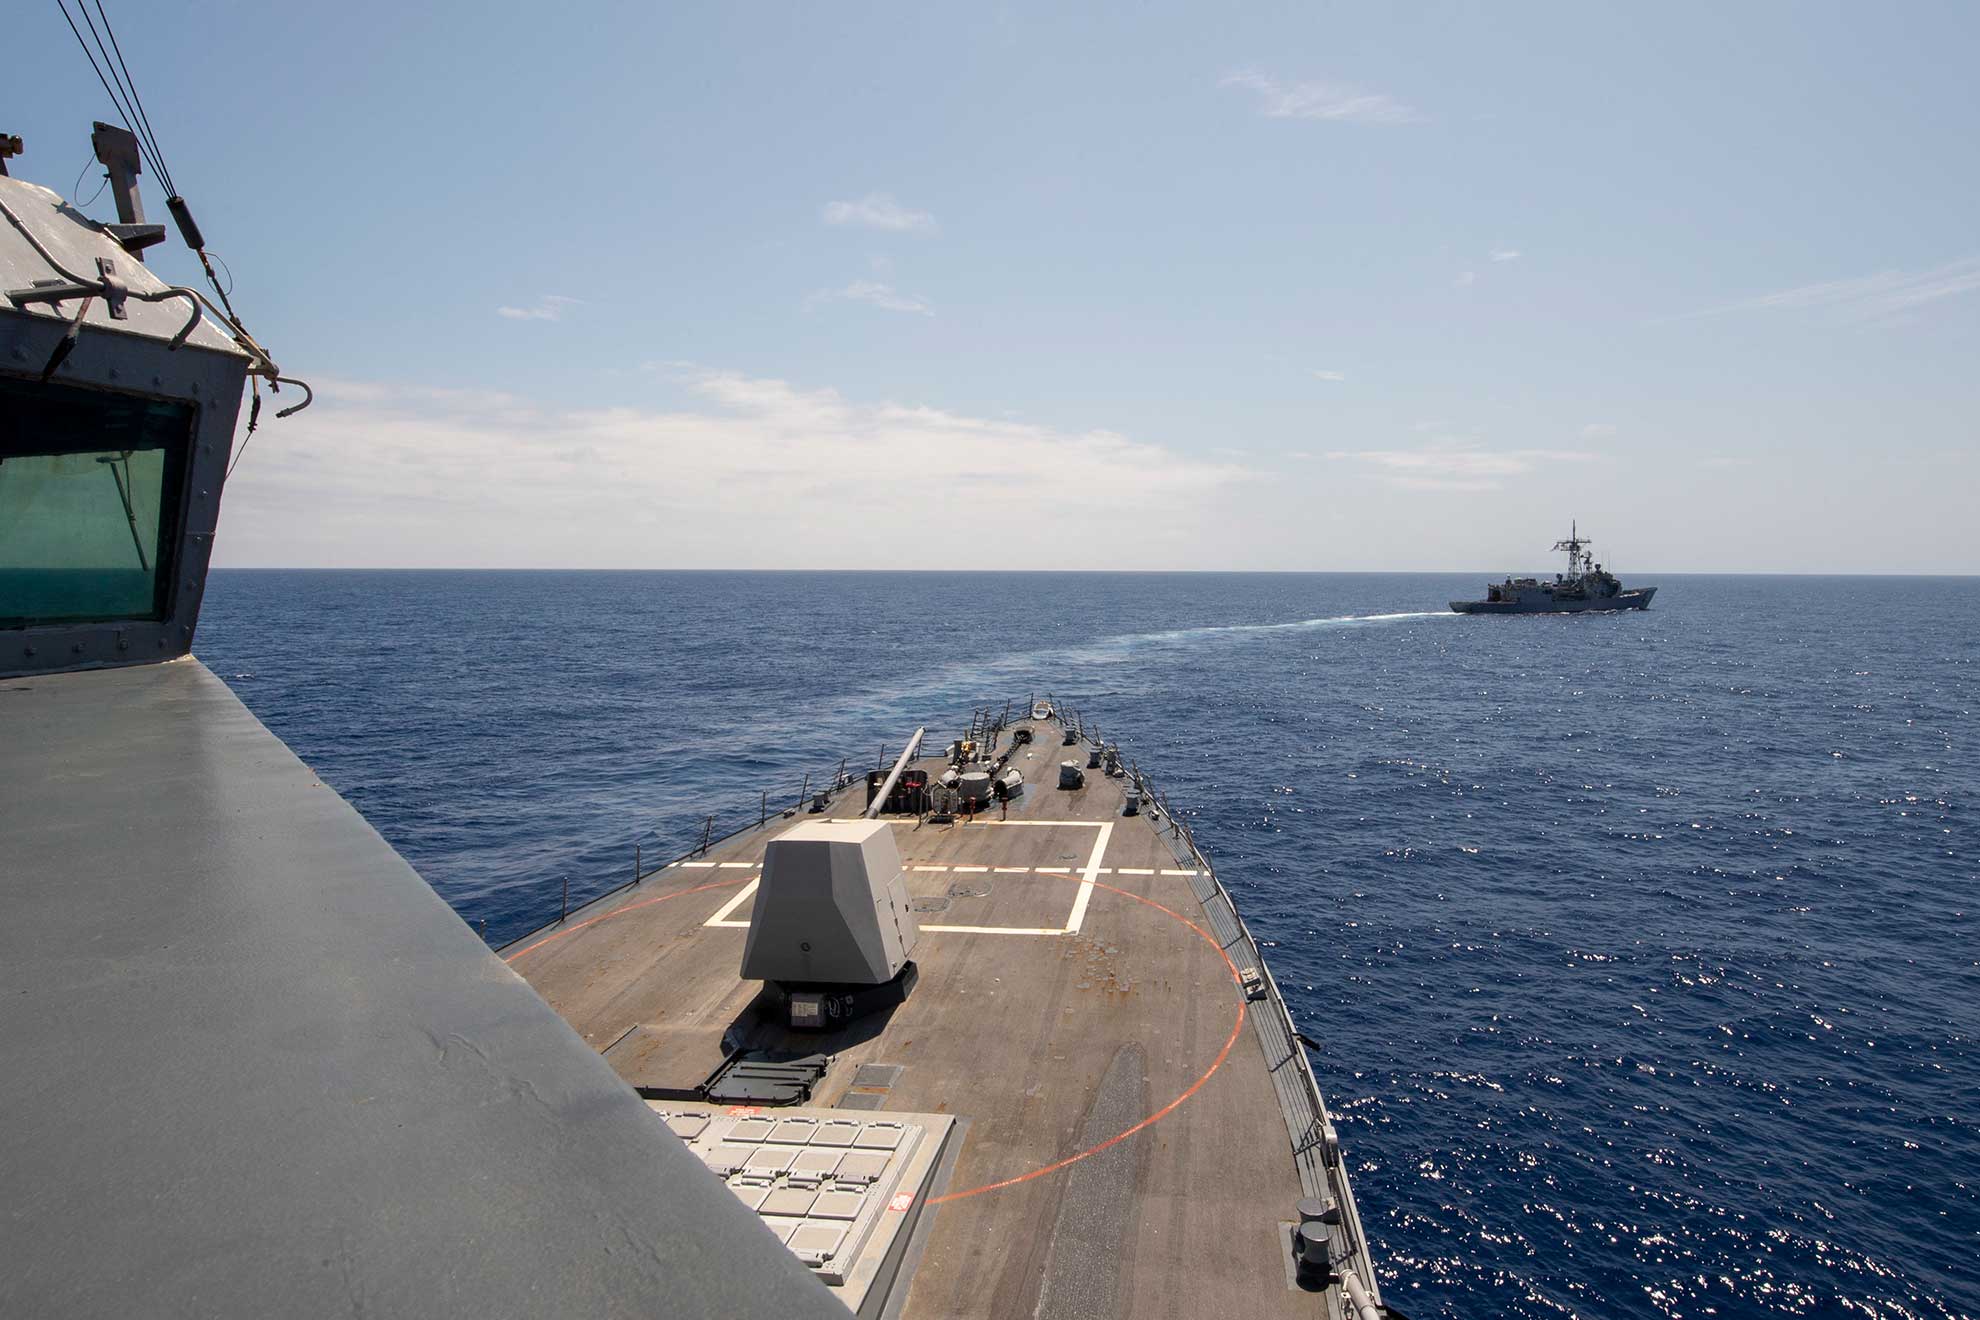 Philippine Sea (April 18, 2019) The Arleigh Burke-class guided-missile destroyer USS Preble (DDG 88) and the Royal Australian Navy Adelaide-class guided-missile frigate HMAS Melbourne (FFG 05) transit in formation during a cooperative deployment. Preble and Melbourne are participating in a cooperative deployment in order to improve on maritime capabilities between partners. Preble is deployed to the U.S 7th Fleet area of operations in support of security and stability in the Indo-Pacific region -- U.S. Navy photo by MCS 1st Class Bryan Niegel. -